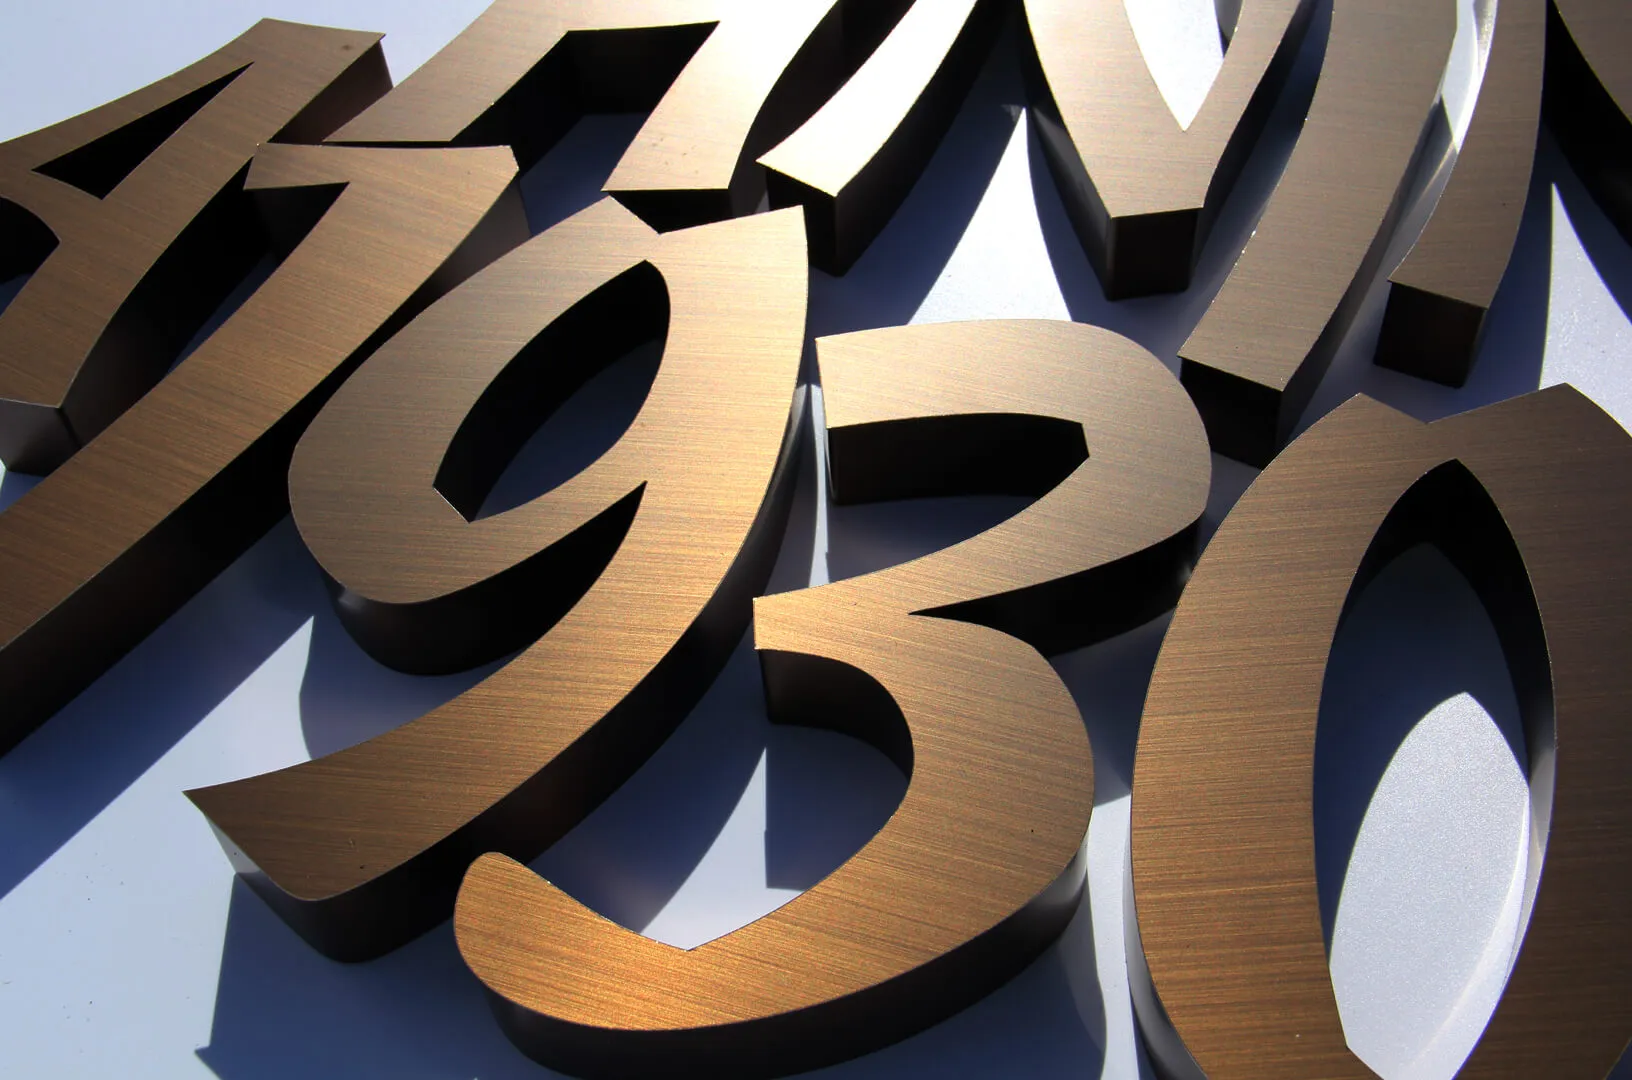 Numbers made of stainless steel in brushed bronze color.